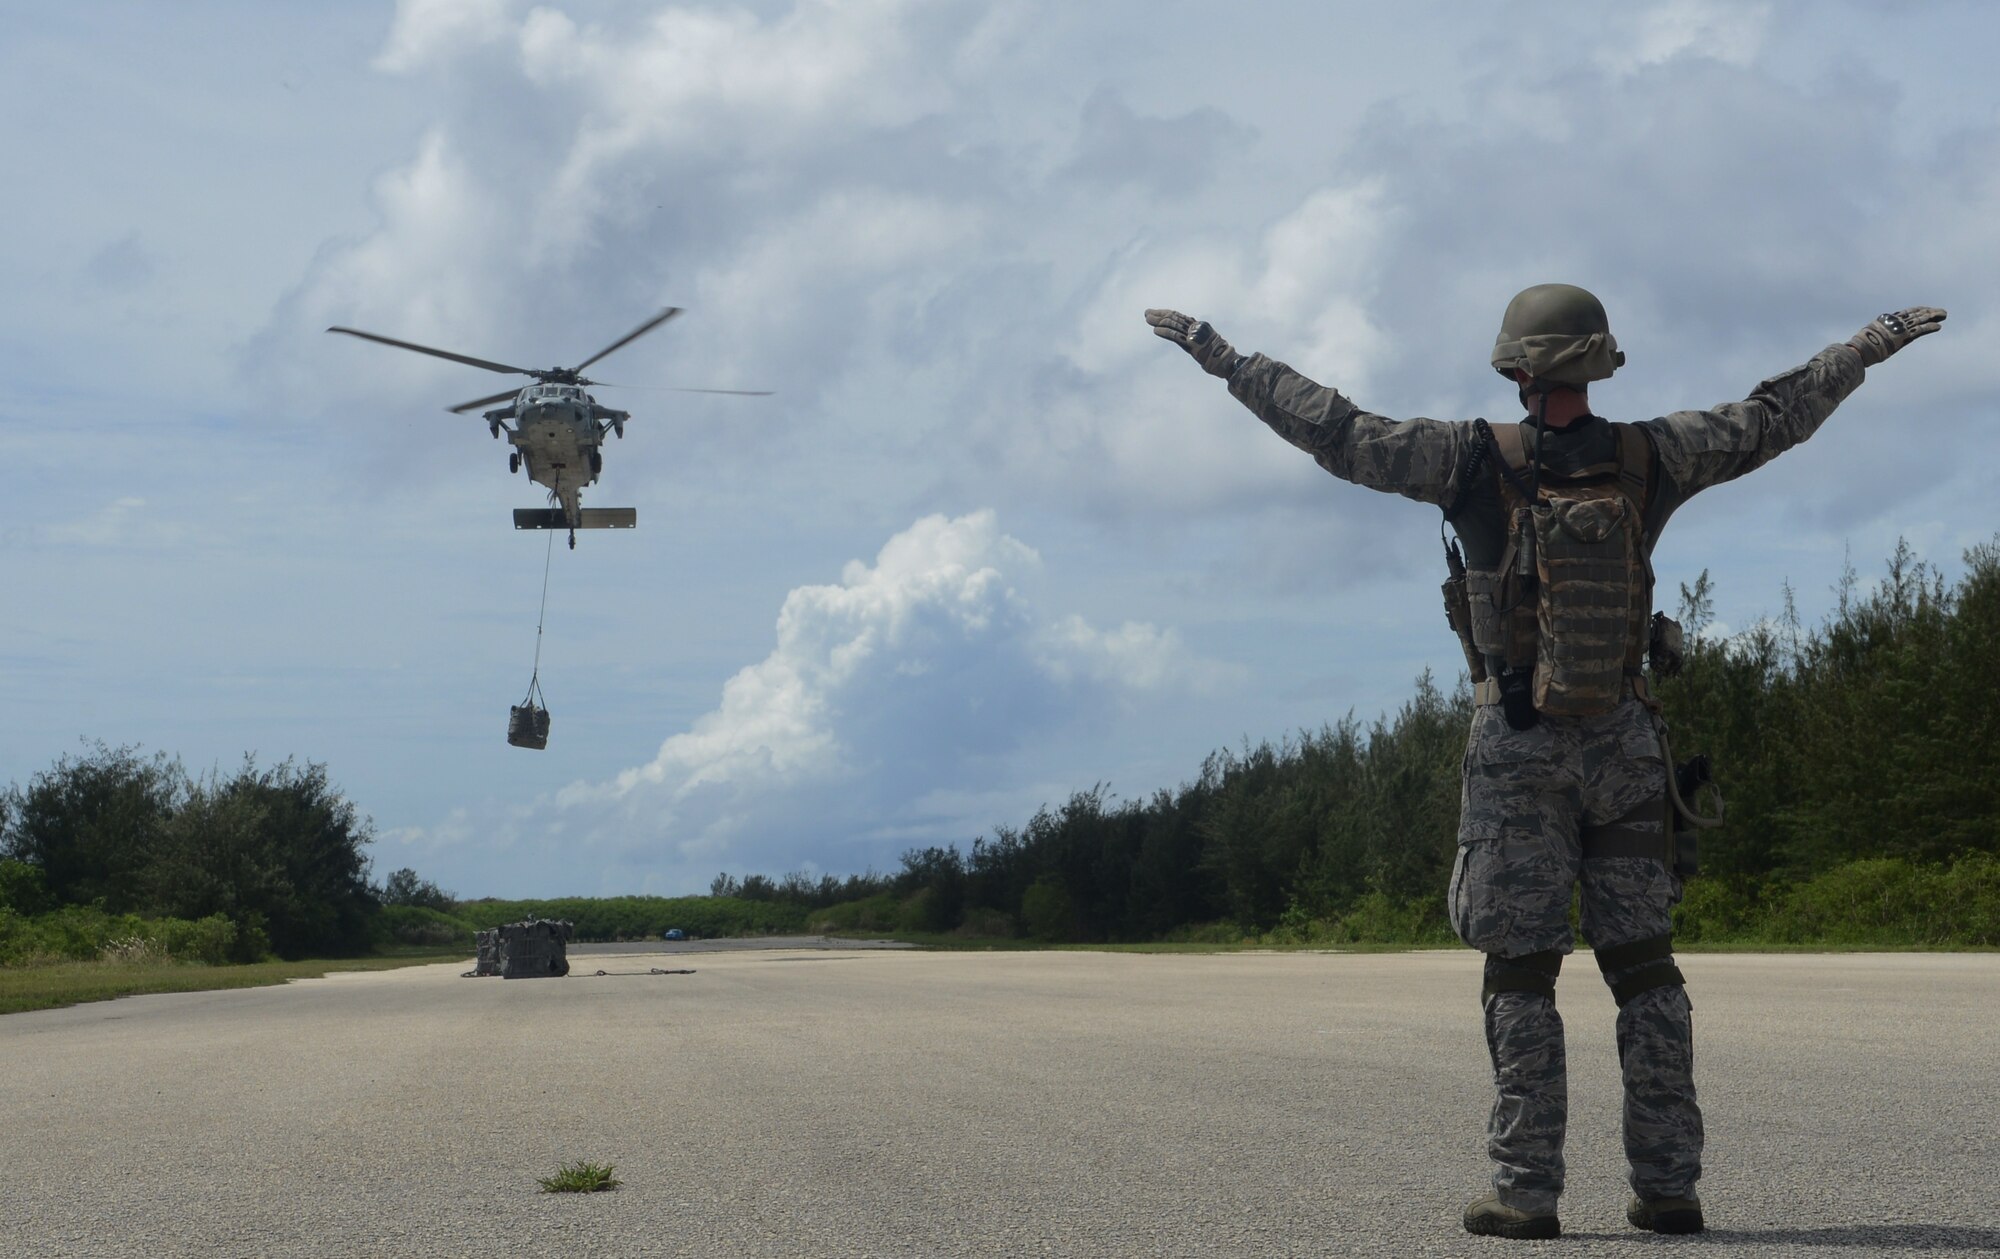 Staff Sgt. Stephen Baker, 736th Security Forces Squadron parachute program manager, directs the helicopter crew to hover during a training exercise Oct. 29, 2013, on Naval Base Guam. The scenario was designed to test the Airmen’s ability to secure and assess a potentially hostile airstrip’s suitability for follow-on Department of Defense aircraft. (U.S. Air Force photo by Airman 1st Class Emily A. Bradley/Released)